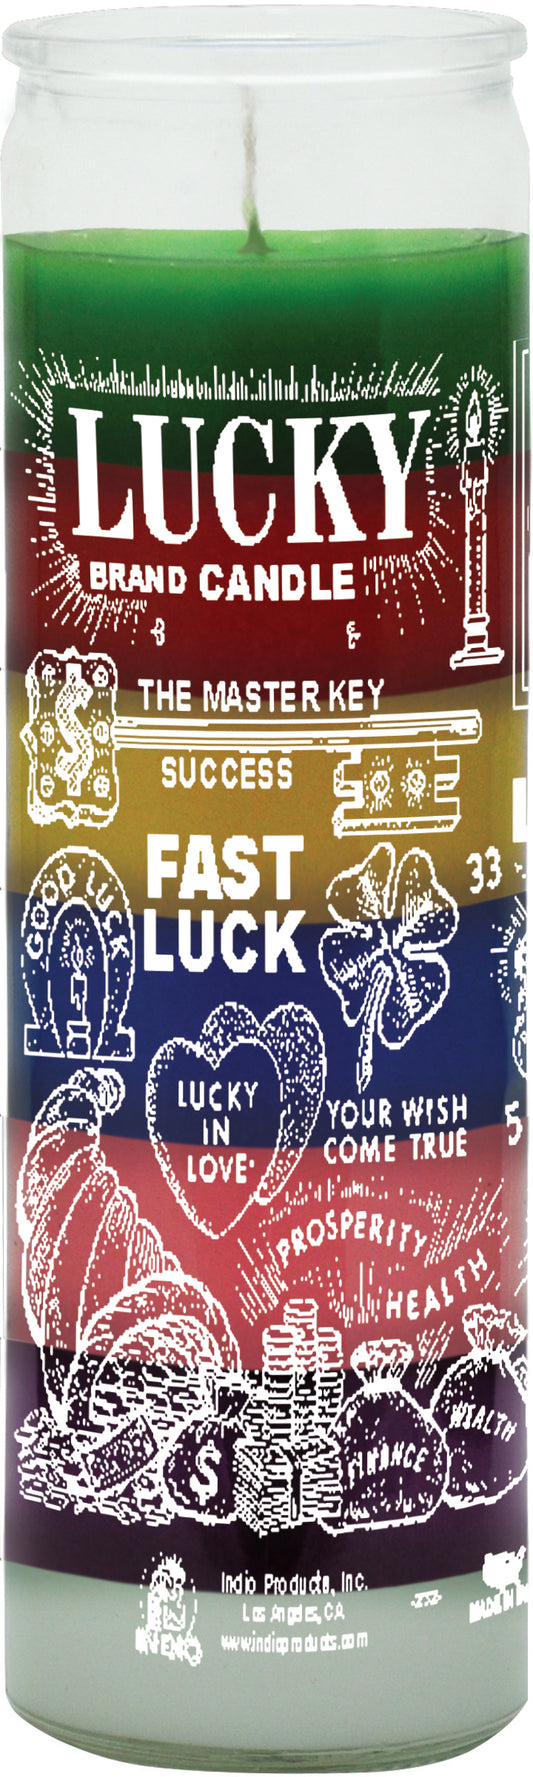 FAST LUCK 7 COLOR-7 DAY SCREEN PRINTED CANDLE